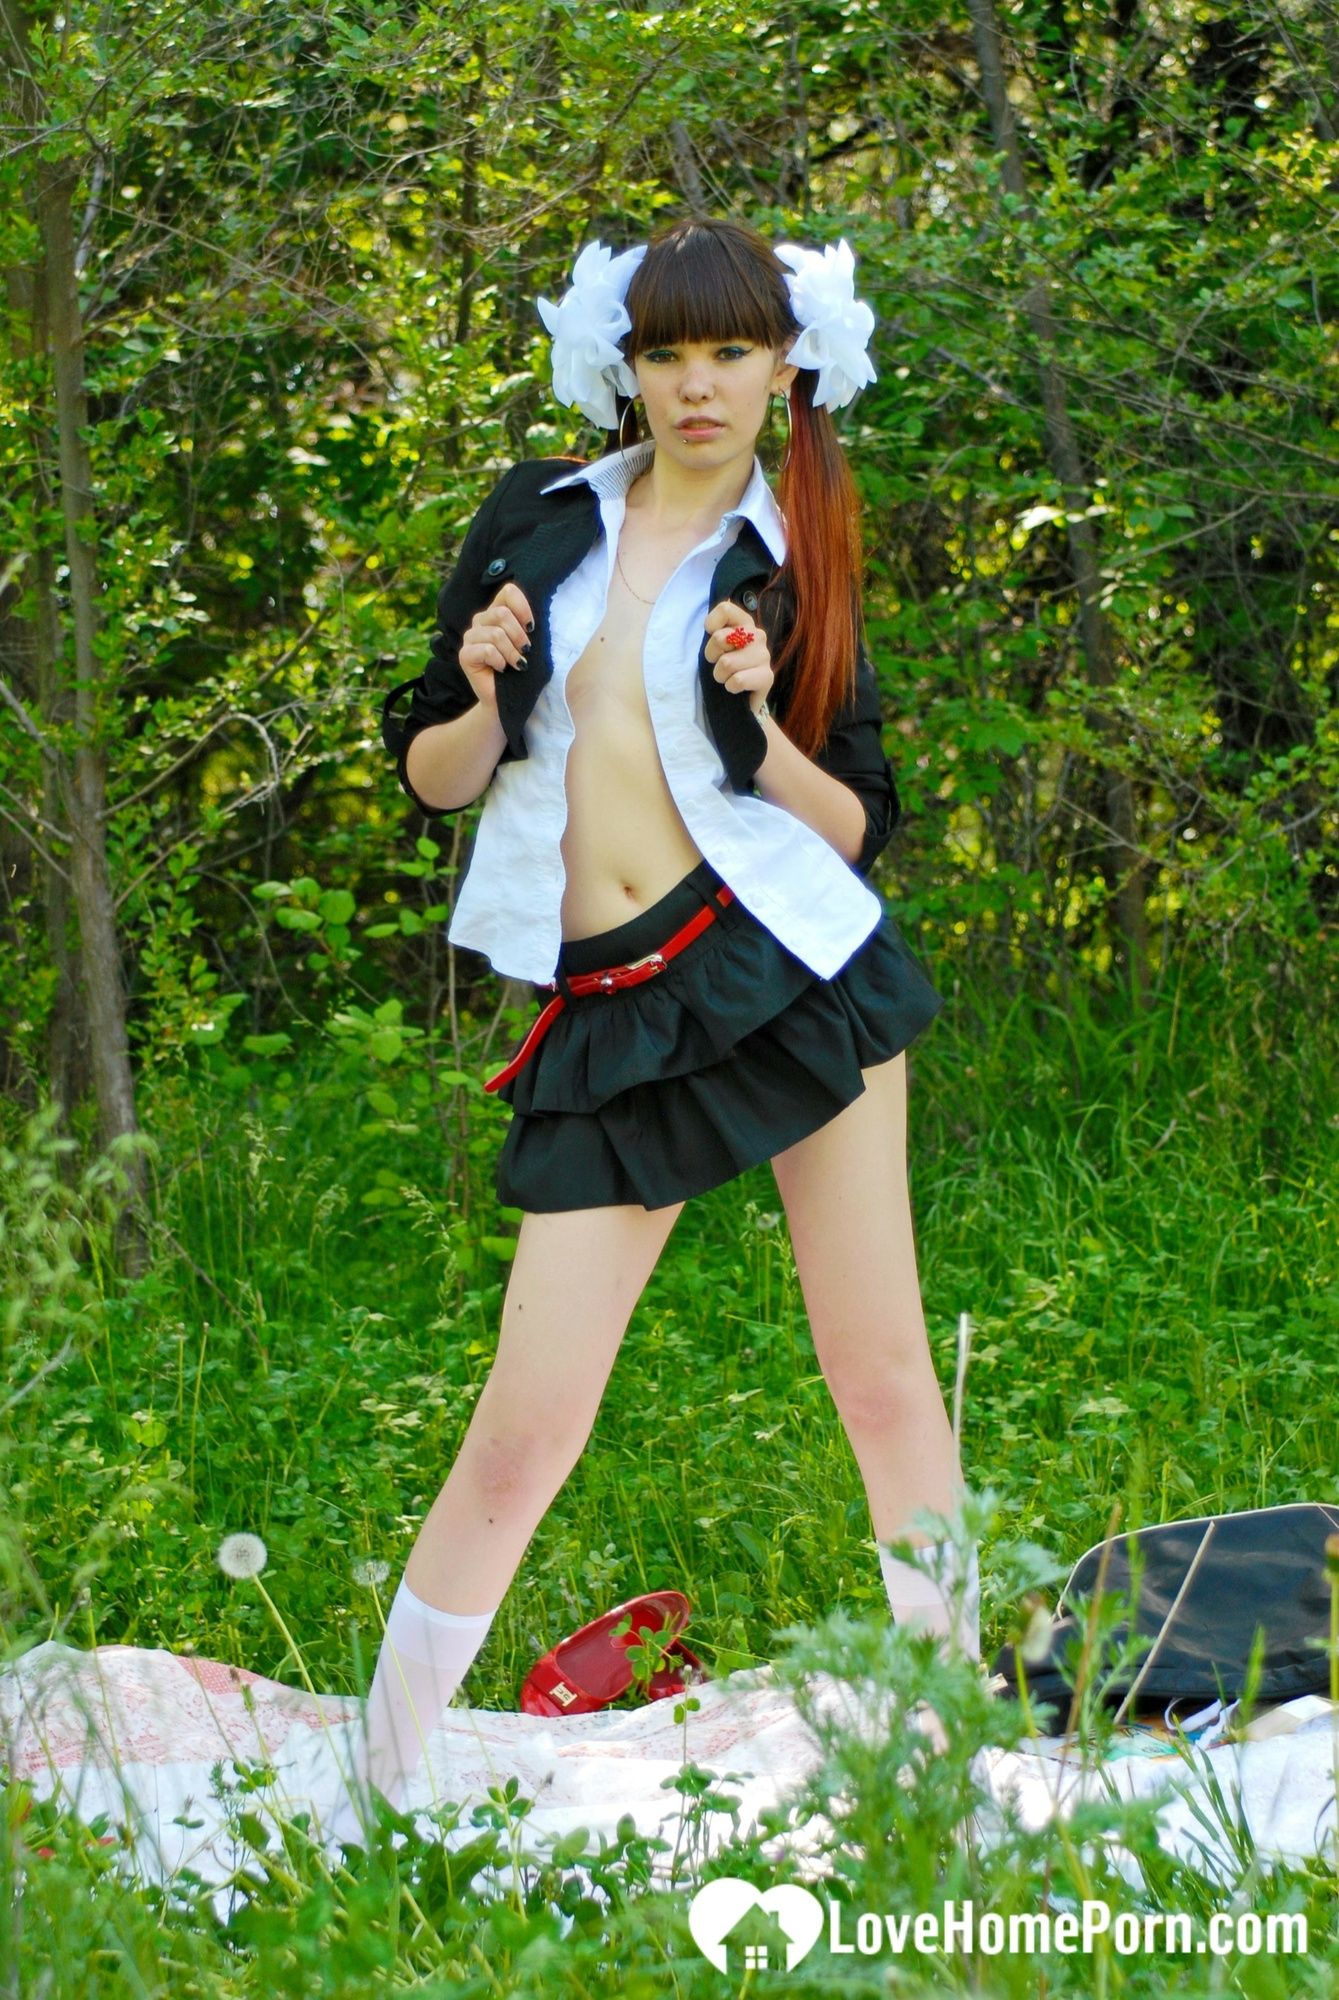 Schoolgirl turns a picnic into a teasing session #10